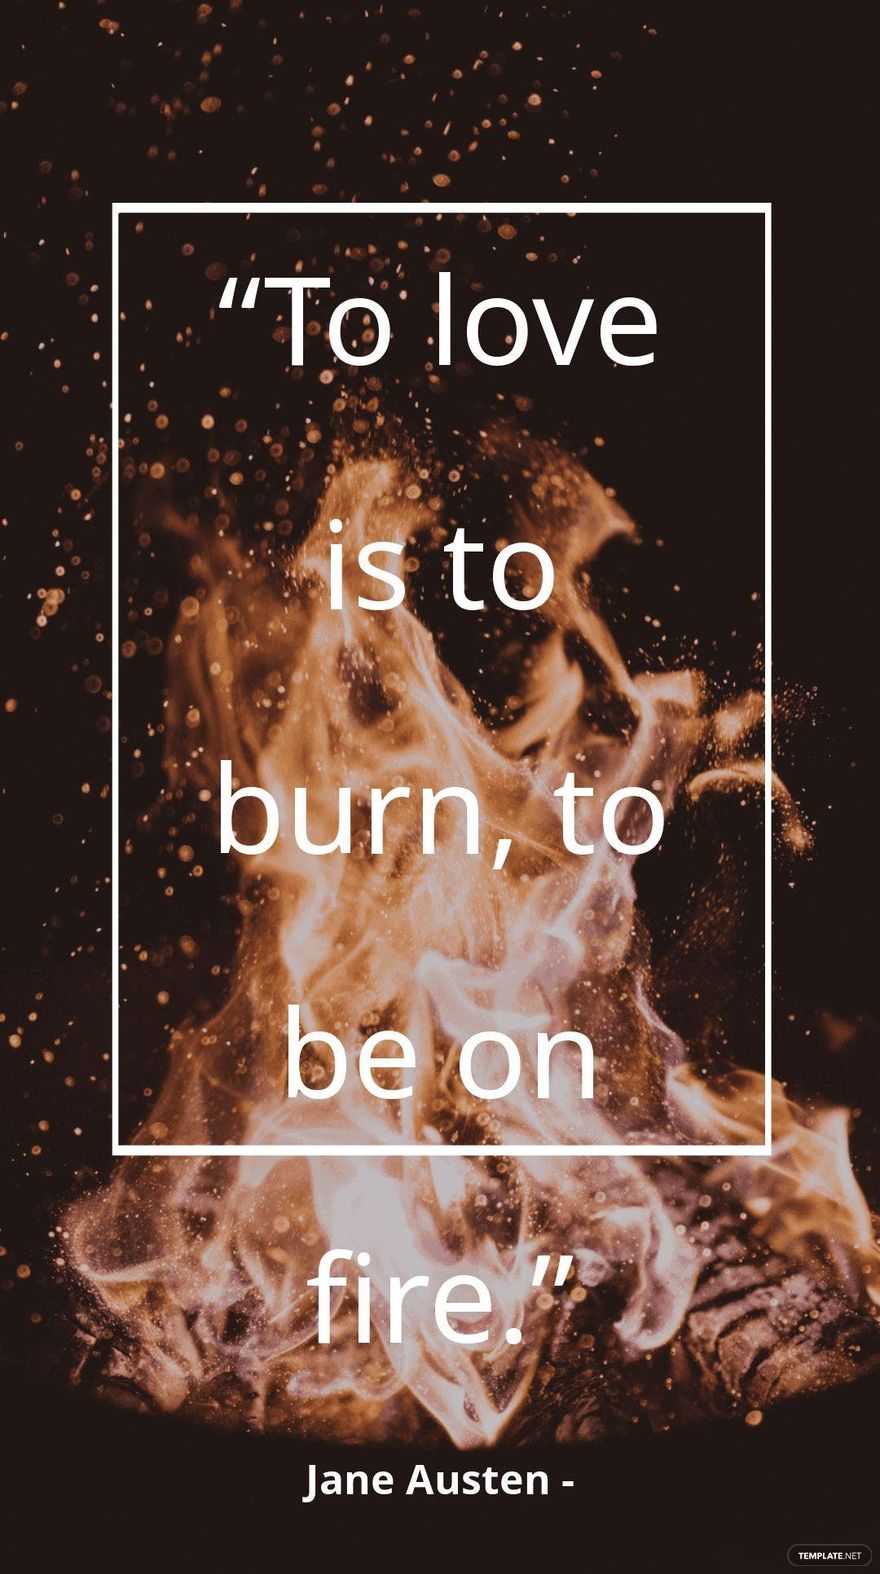 Jane Austen - “To love is to burn, to be on fire.”